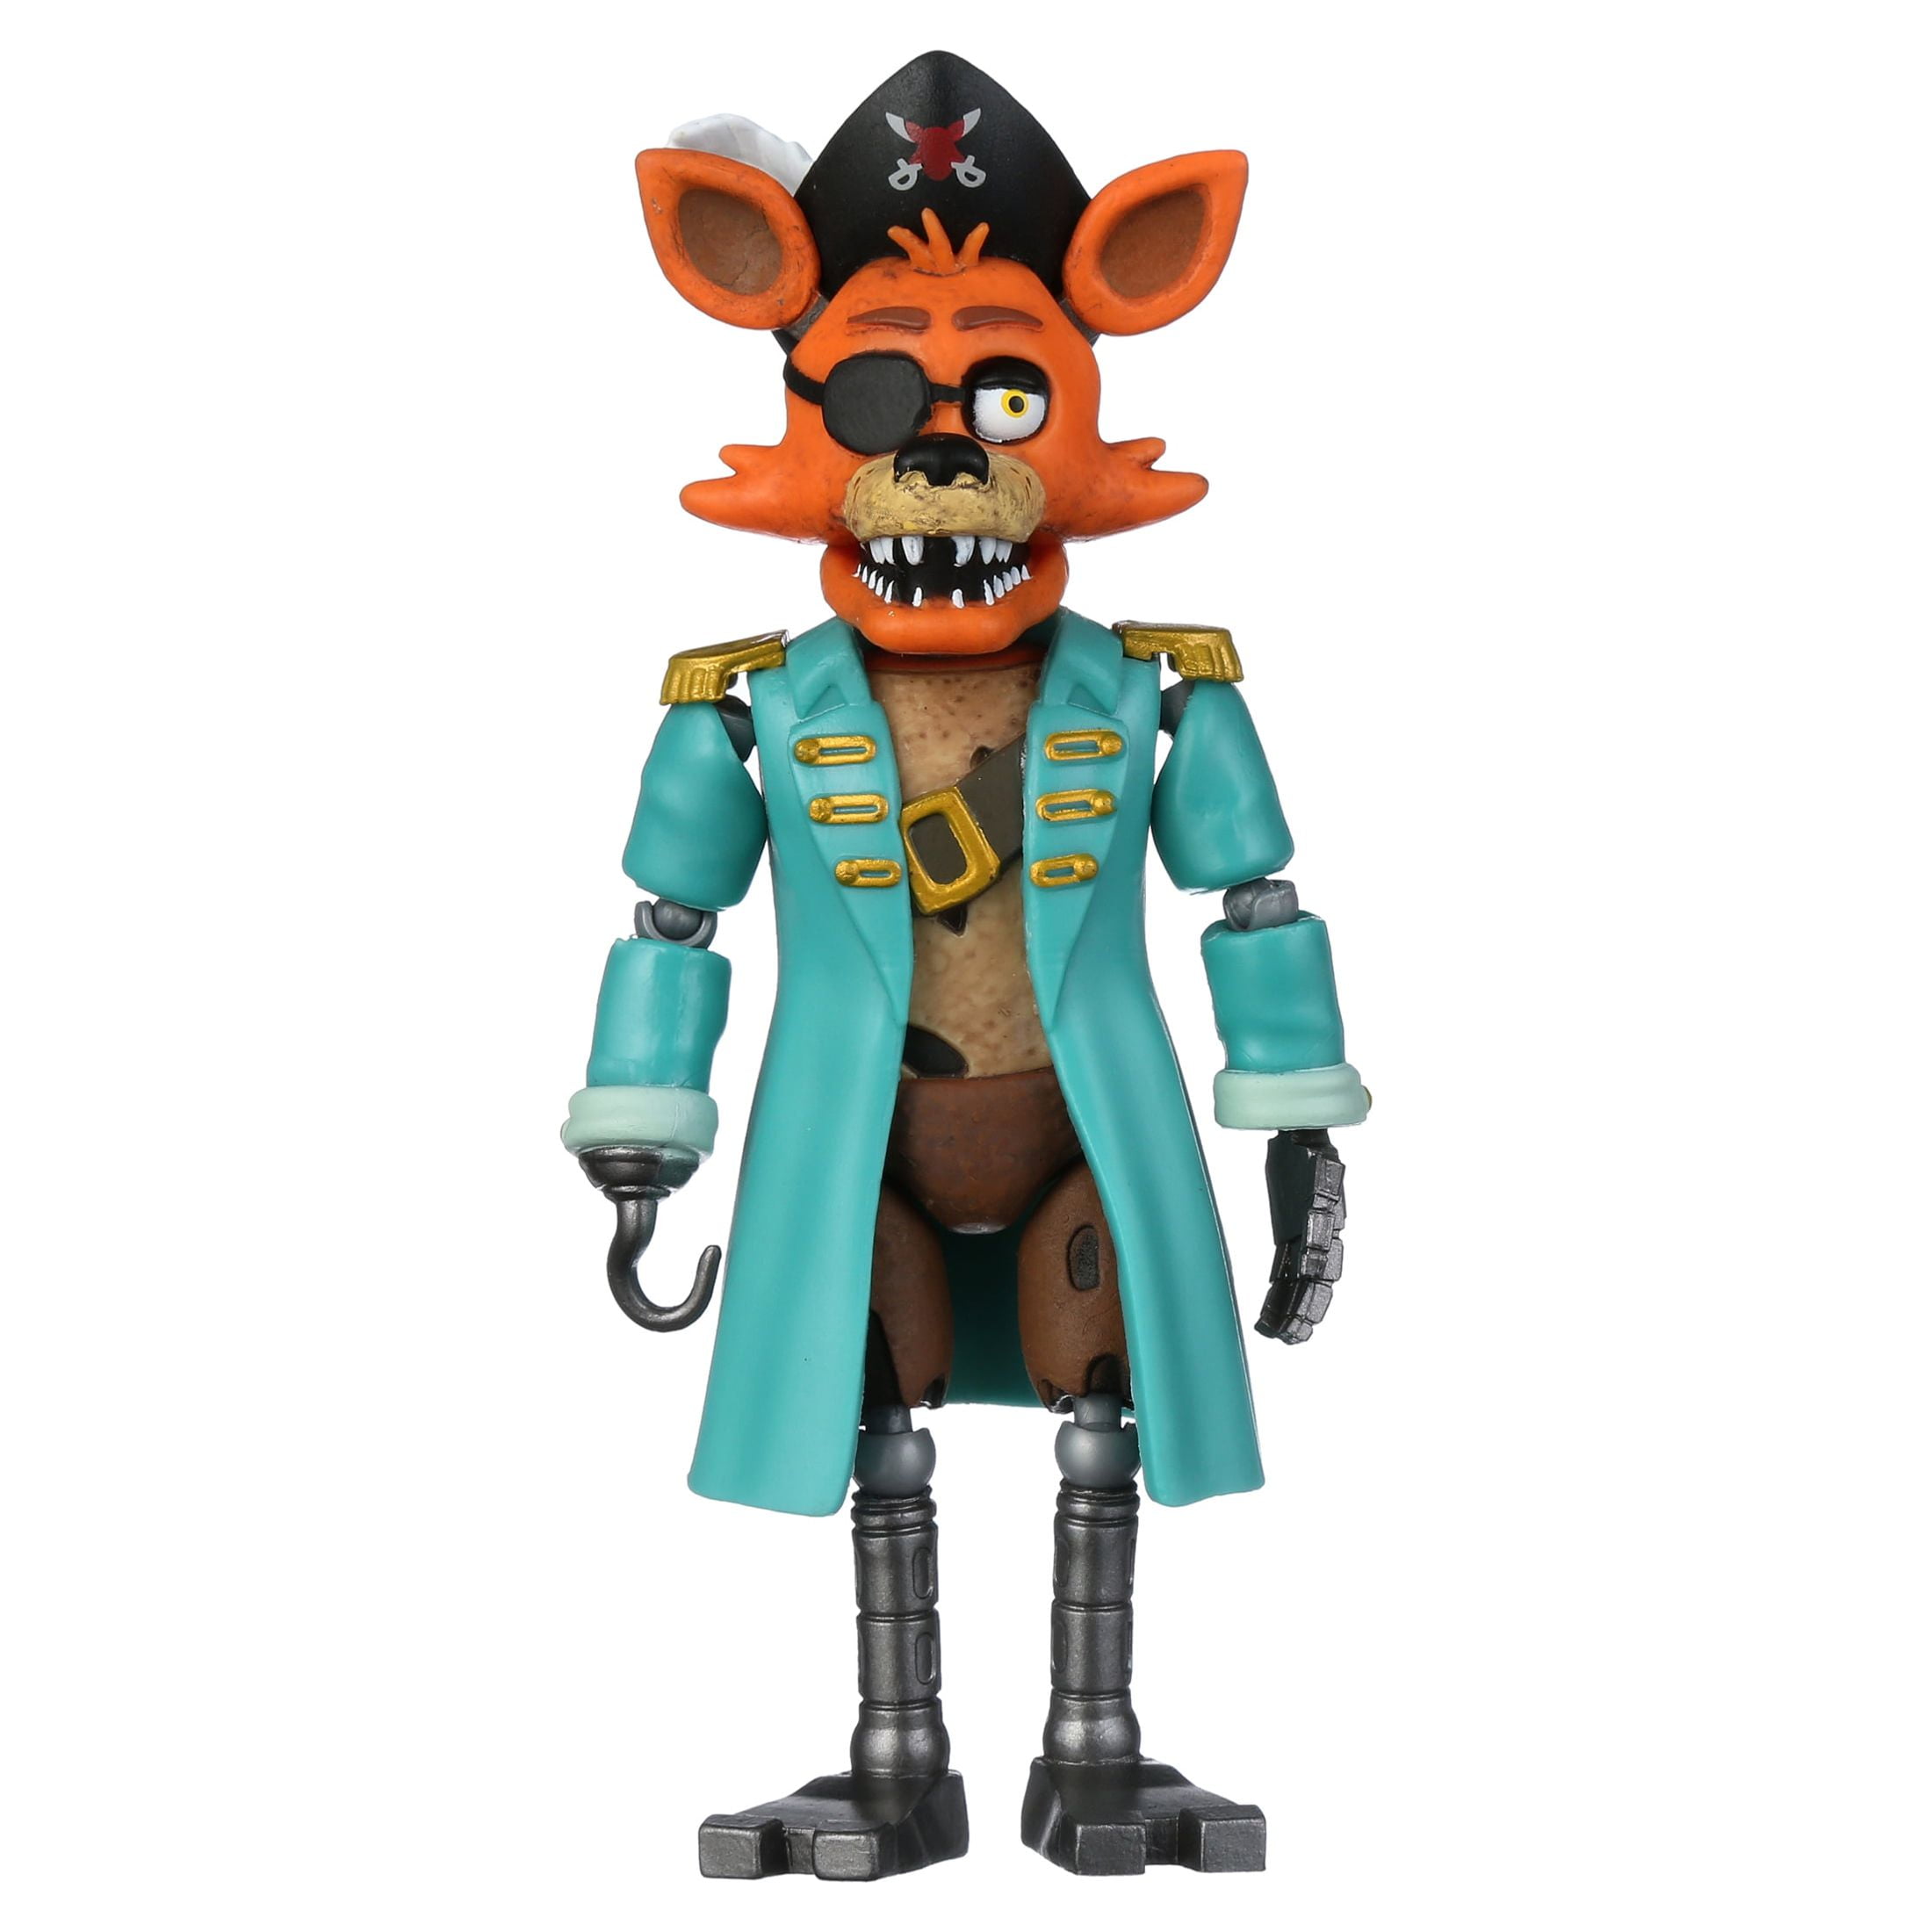 Funko Five Nights At Freddy's Security Breach Action Figures